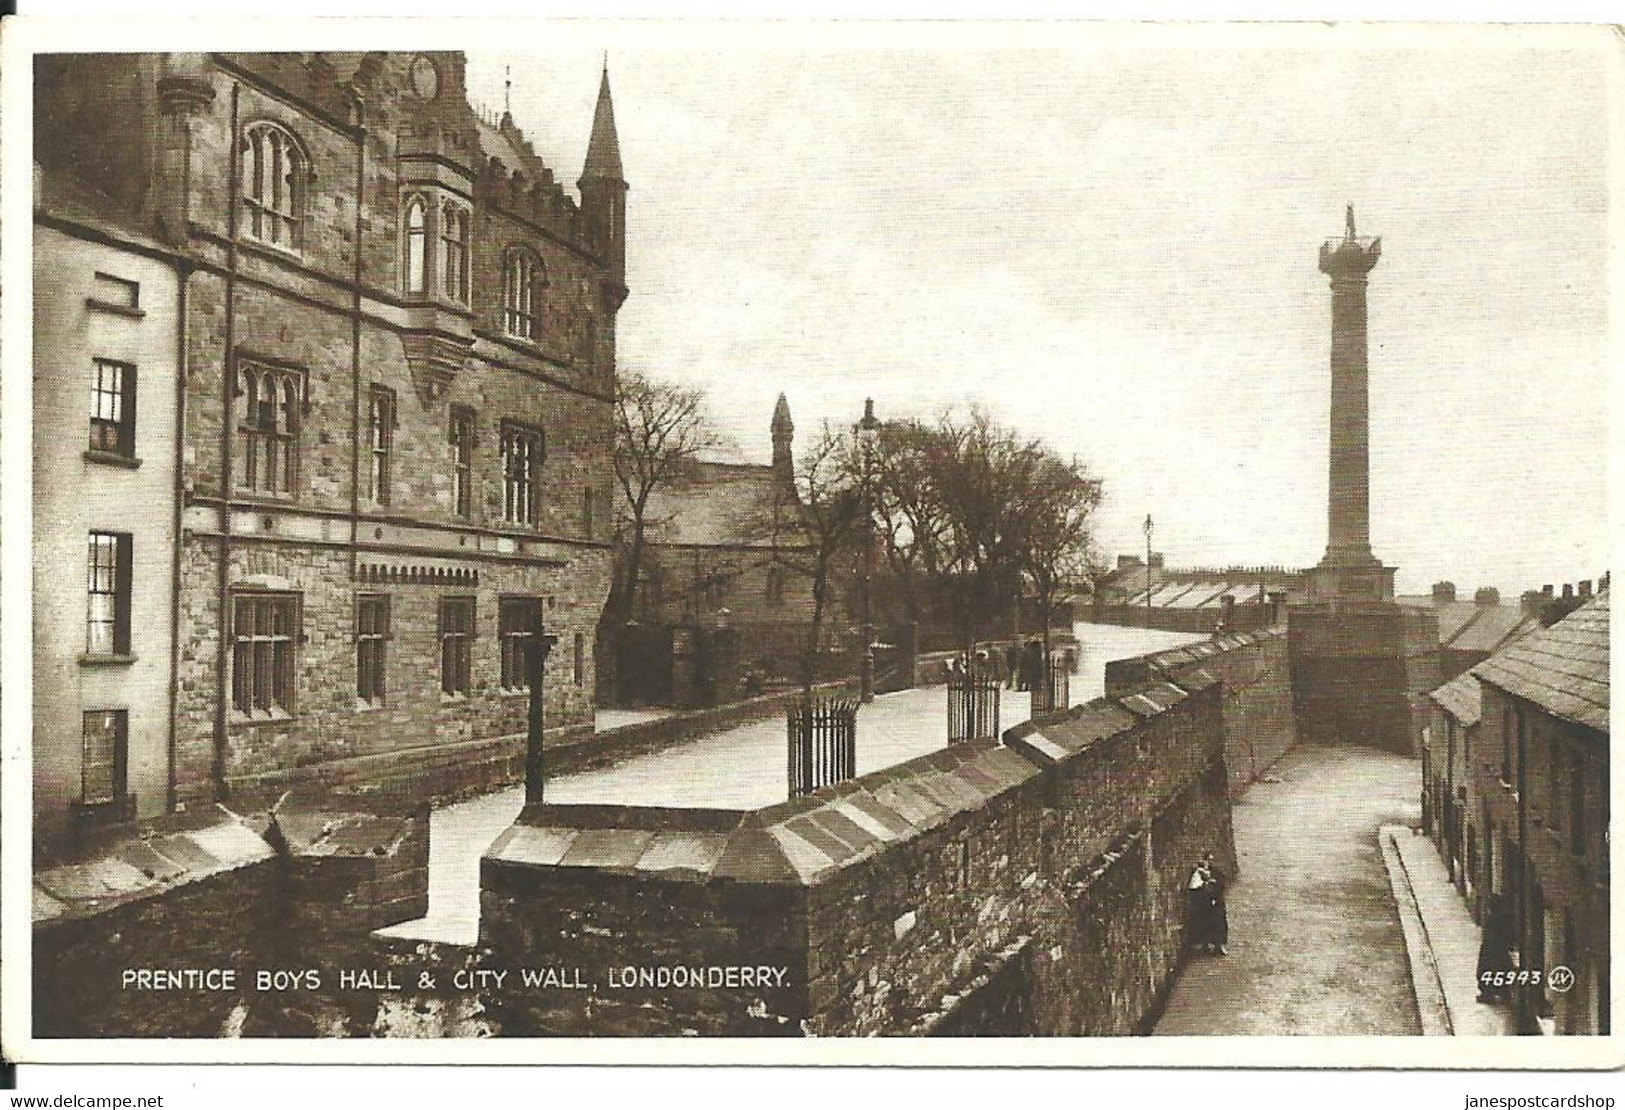 LONDONDERRY - PRENTICE BOYS HALL & CITY HALL - UNPOSTED - VALENTINES POSTCARD - Londonderry